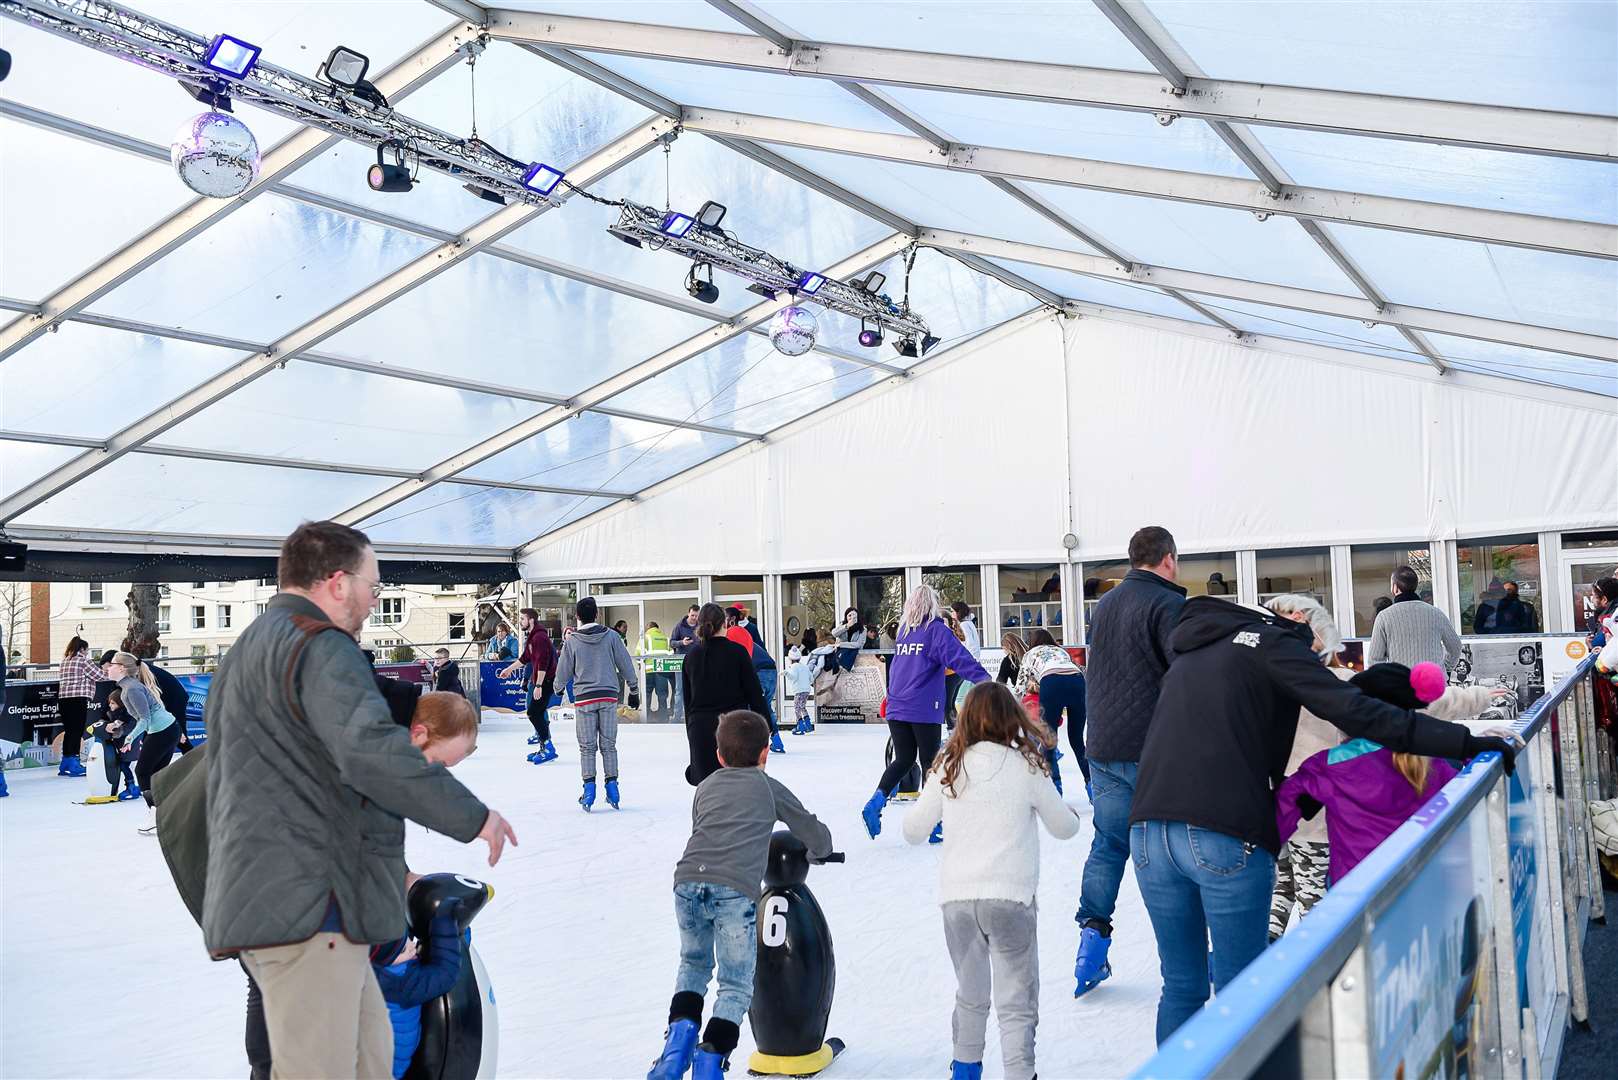 Canterbury's ice rink wasn't financially successful